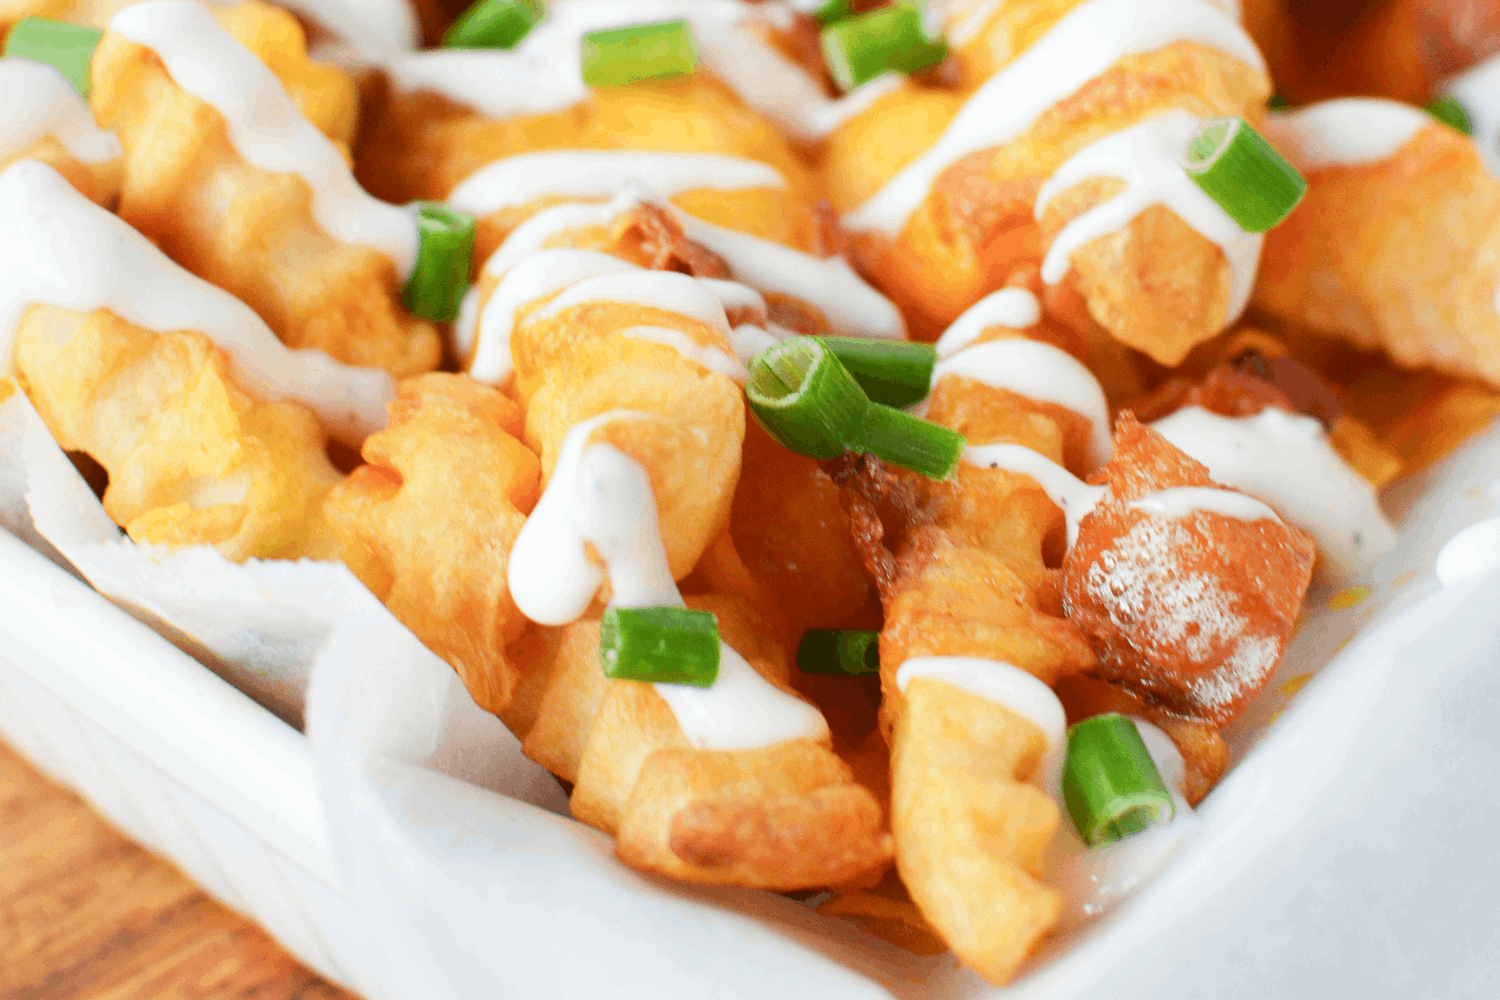 Air Fryer Frozen French Fries covered in bacon, melted cheddar cheese and ranch dressing